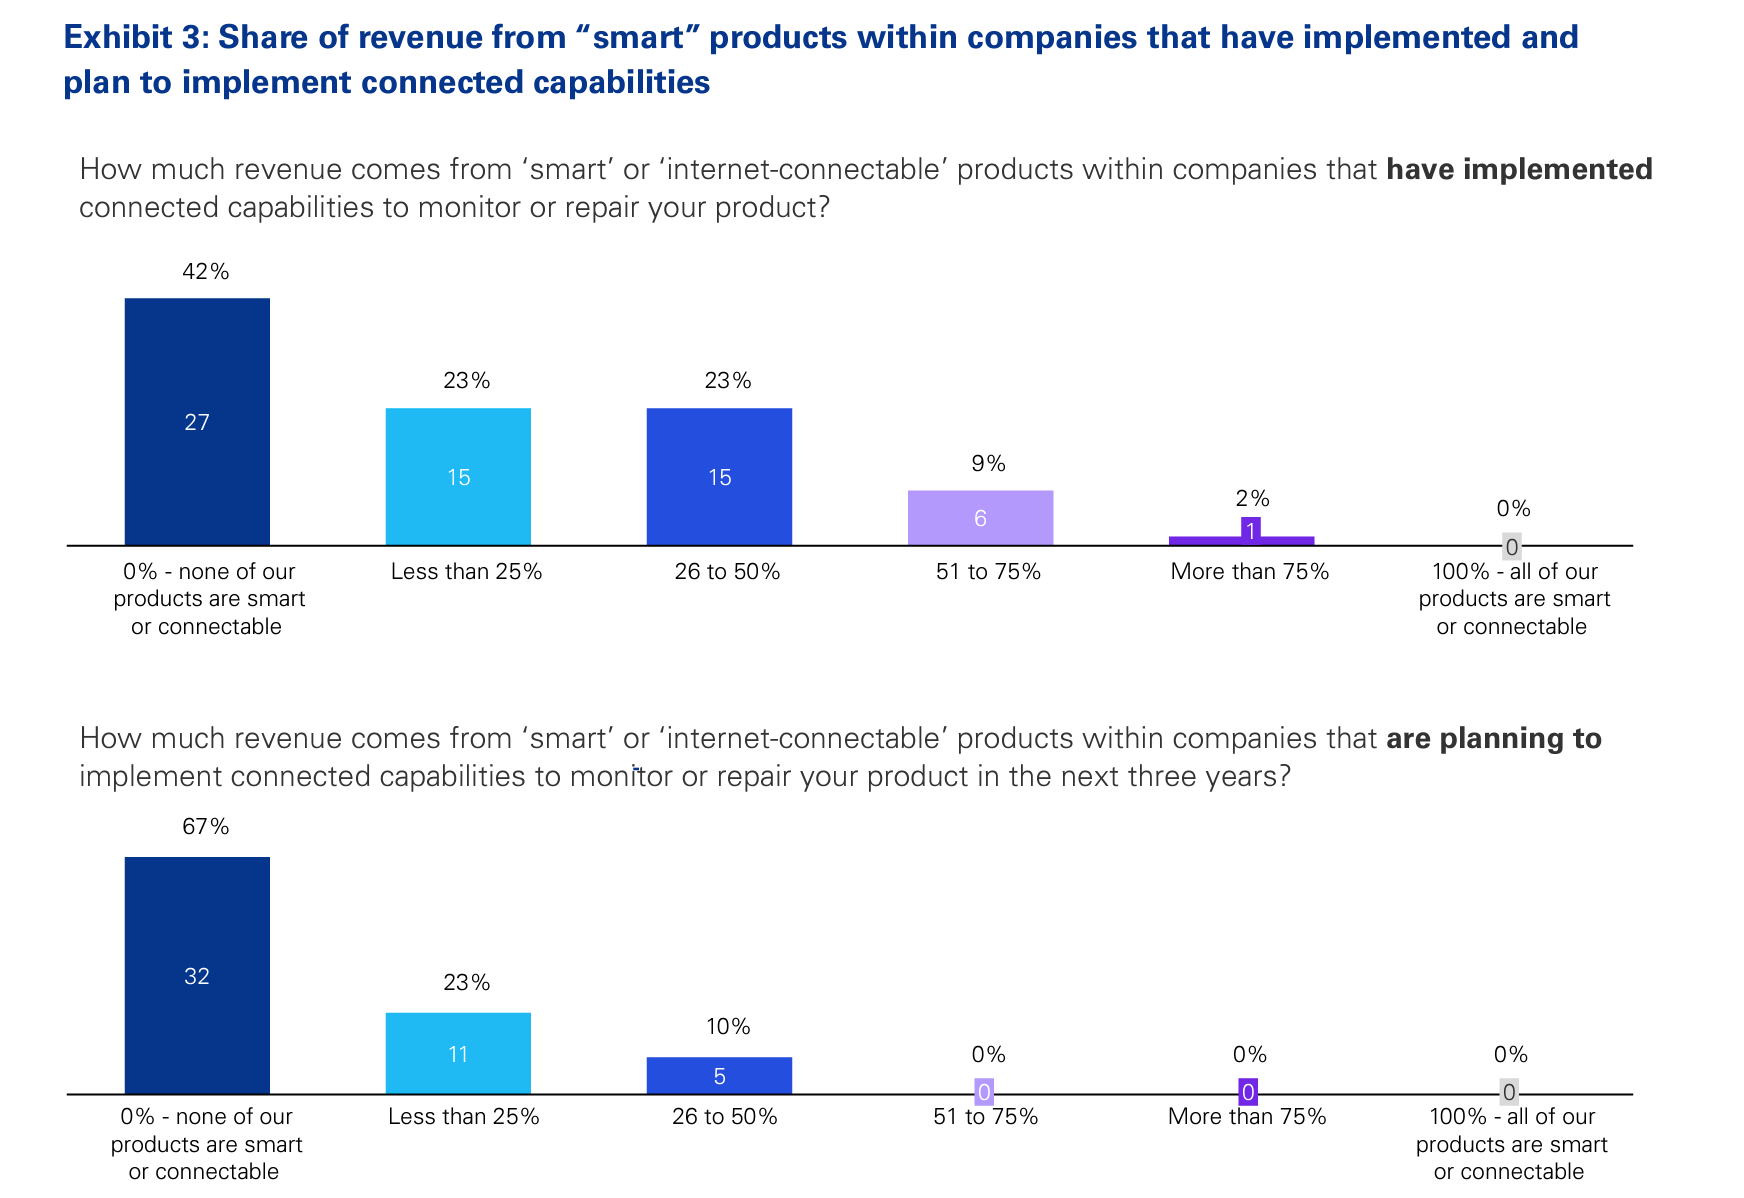 Share of revenue from "smart" products within companies that have implemented and plan to implement connected capabilities data graph